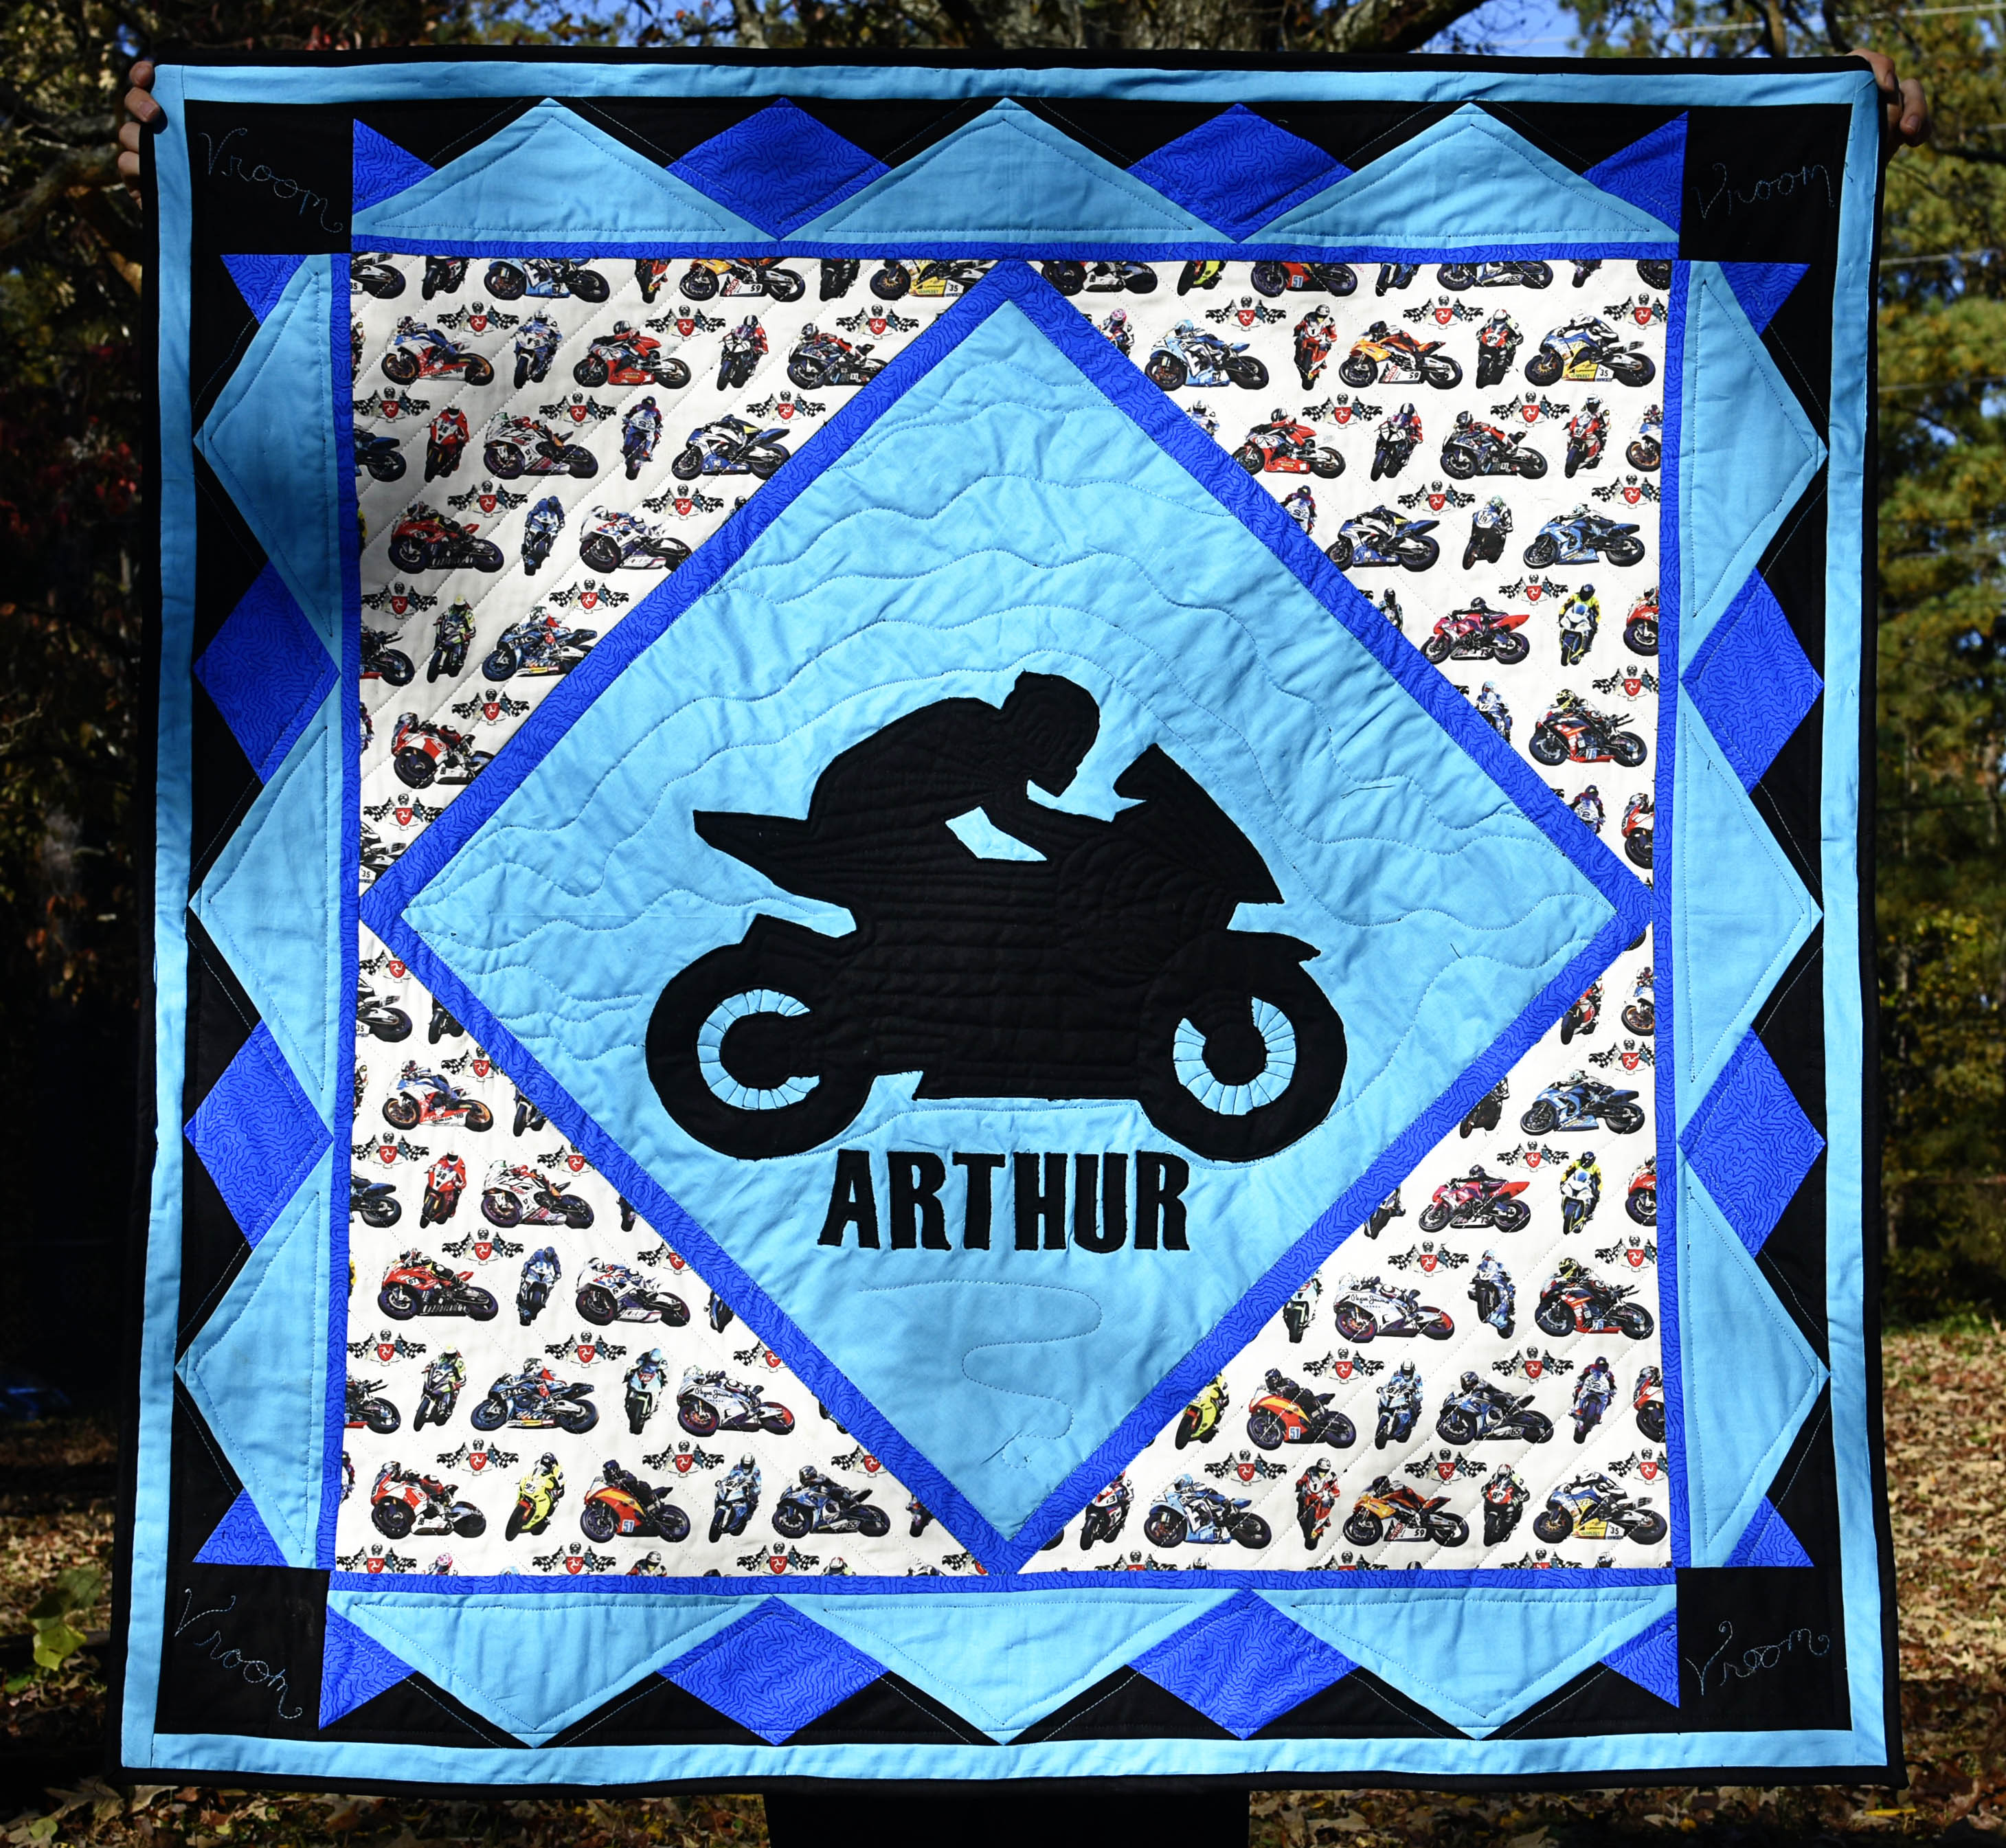 vroom-vroom-motorcycle-quilt-done-quiltingboard-forums